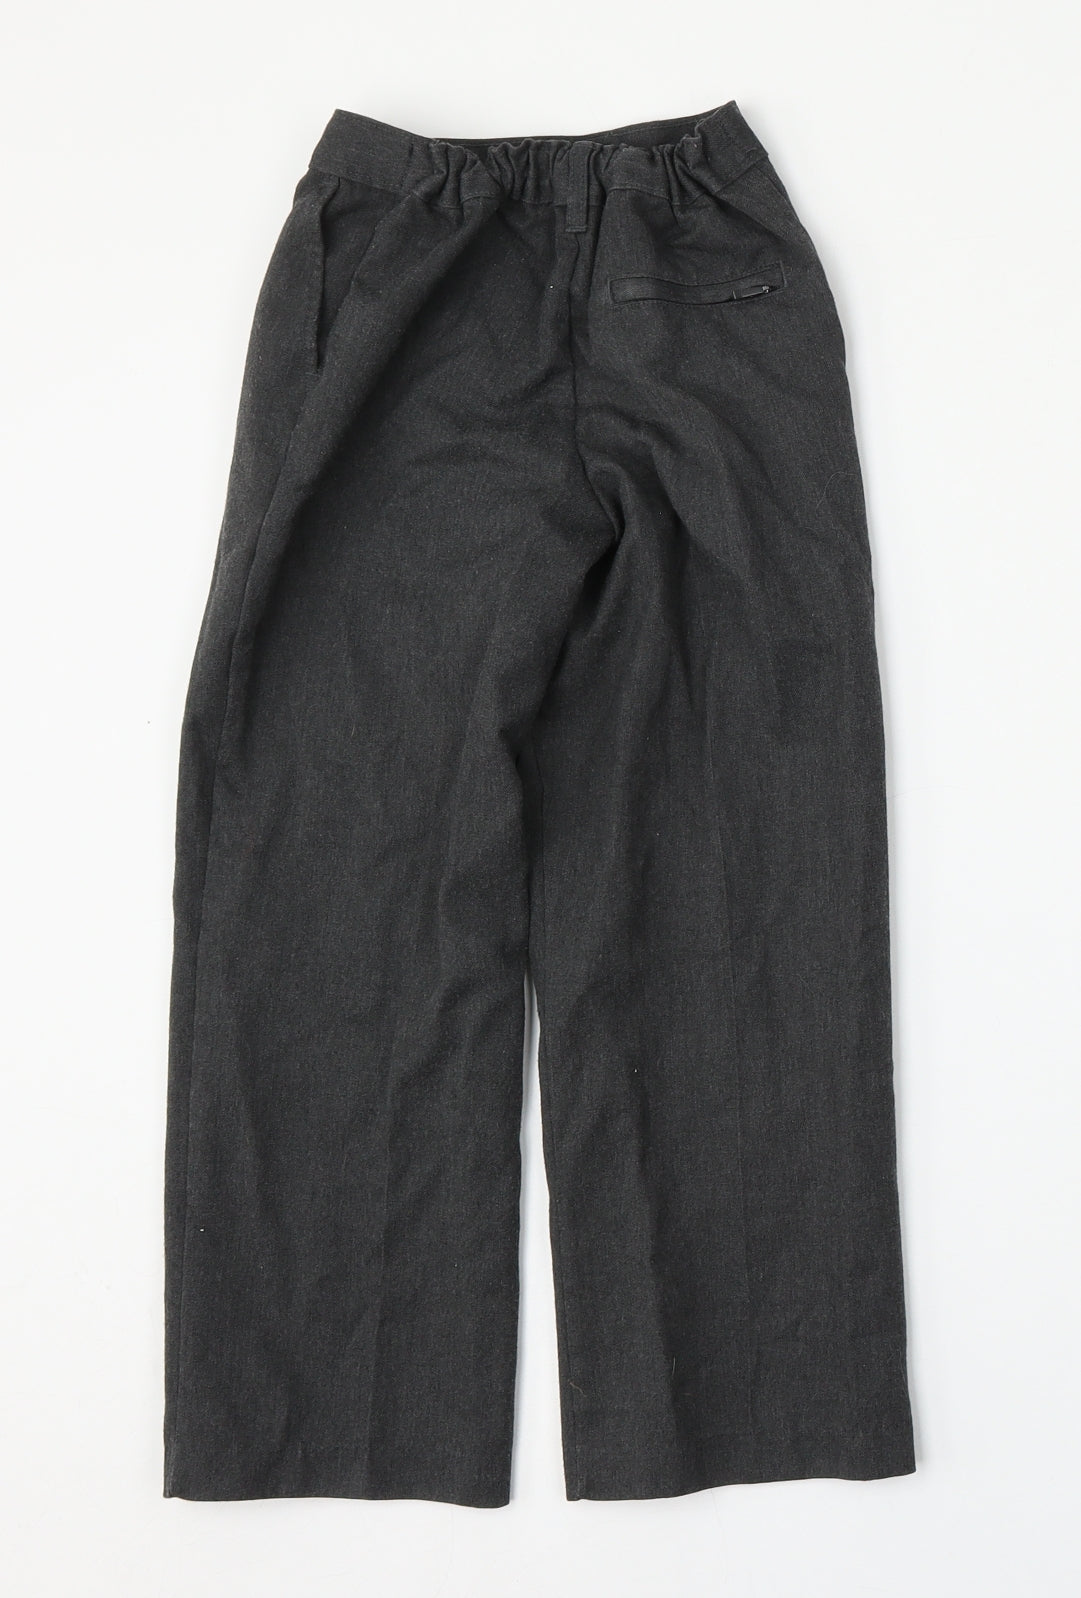 Marks and Spencer Girls Grey  Polyester Capri Trousers Size 6 Years  Regular